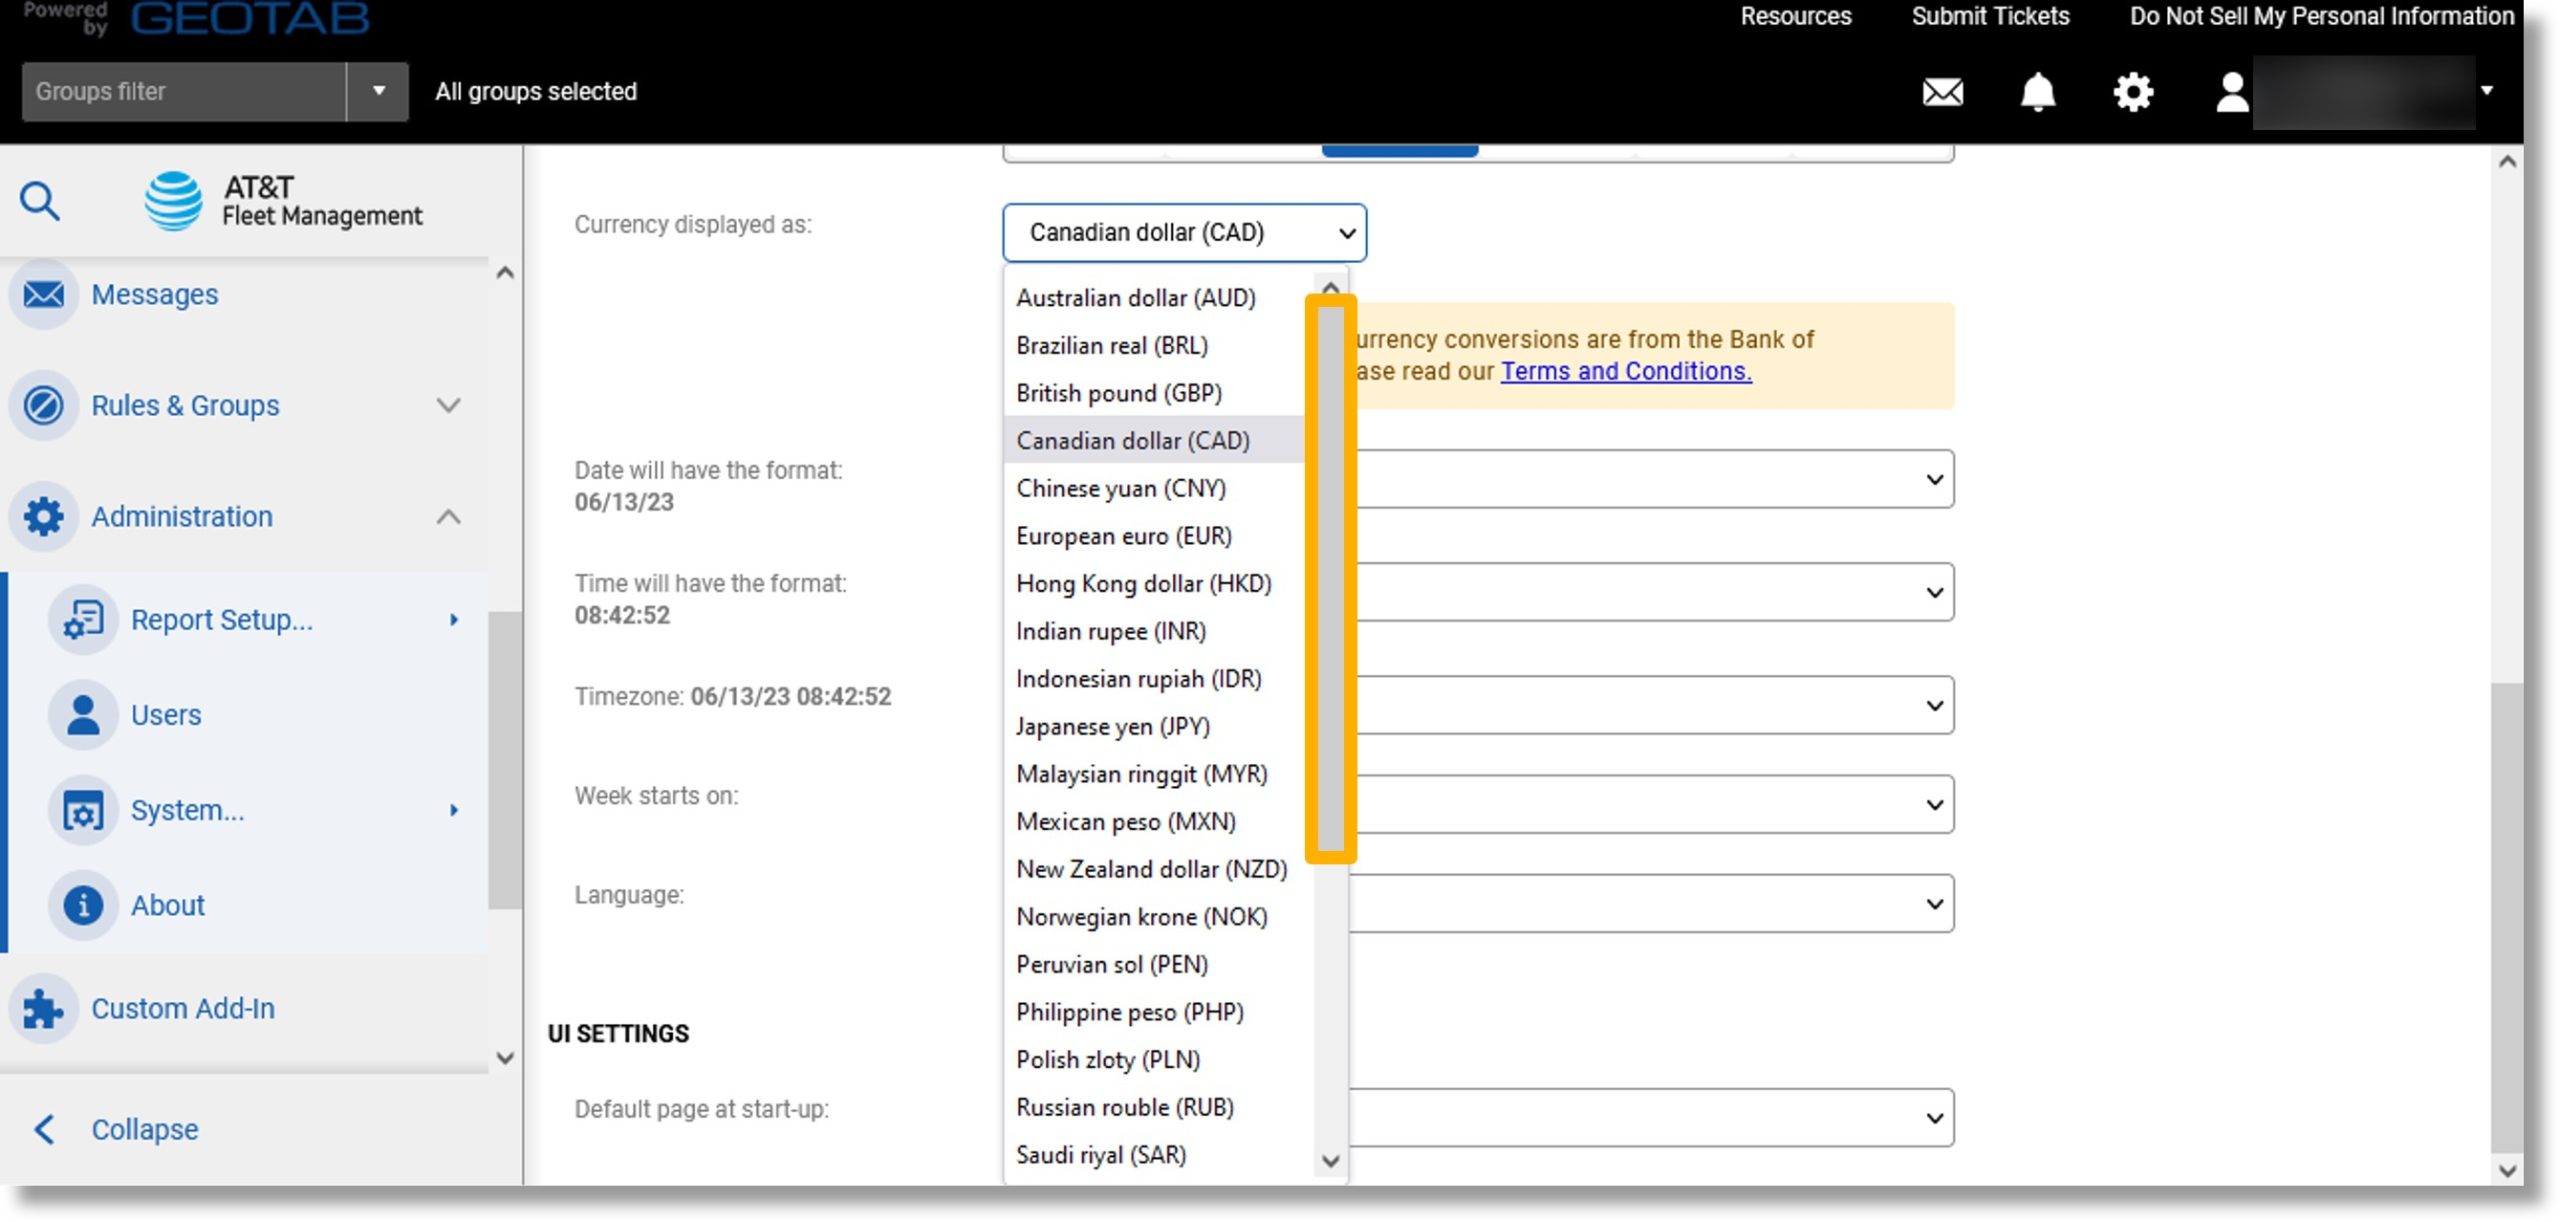 Create a new user in ATT Fleet Management for Enterprise Government 28 scaled